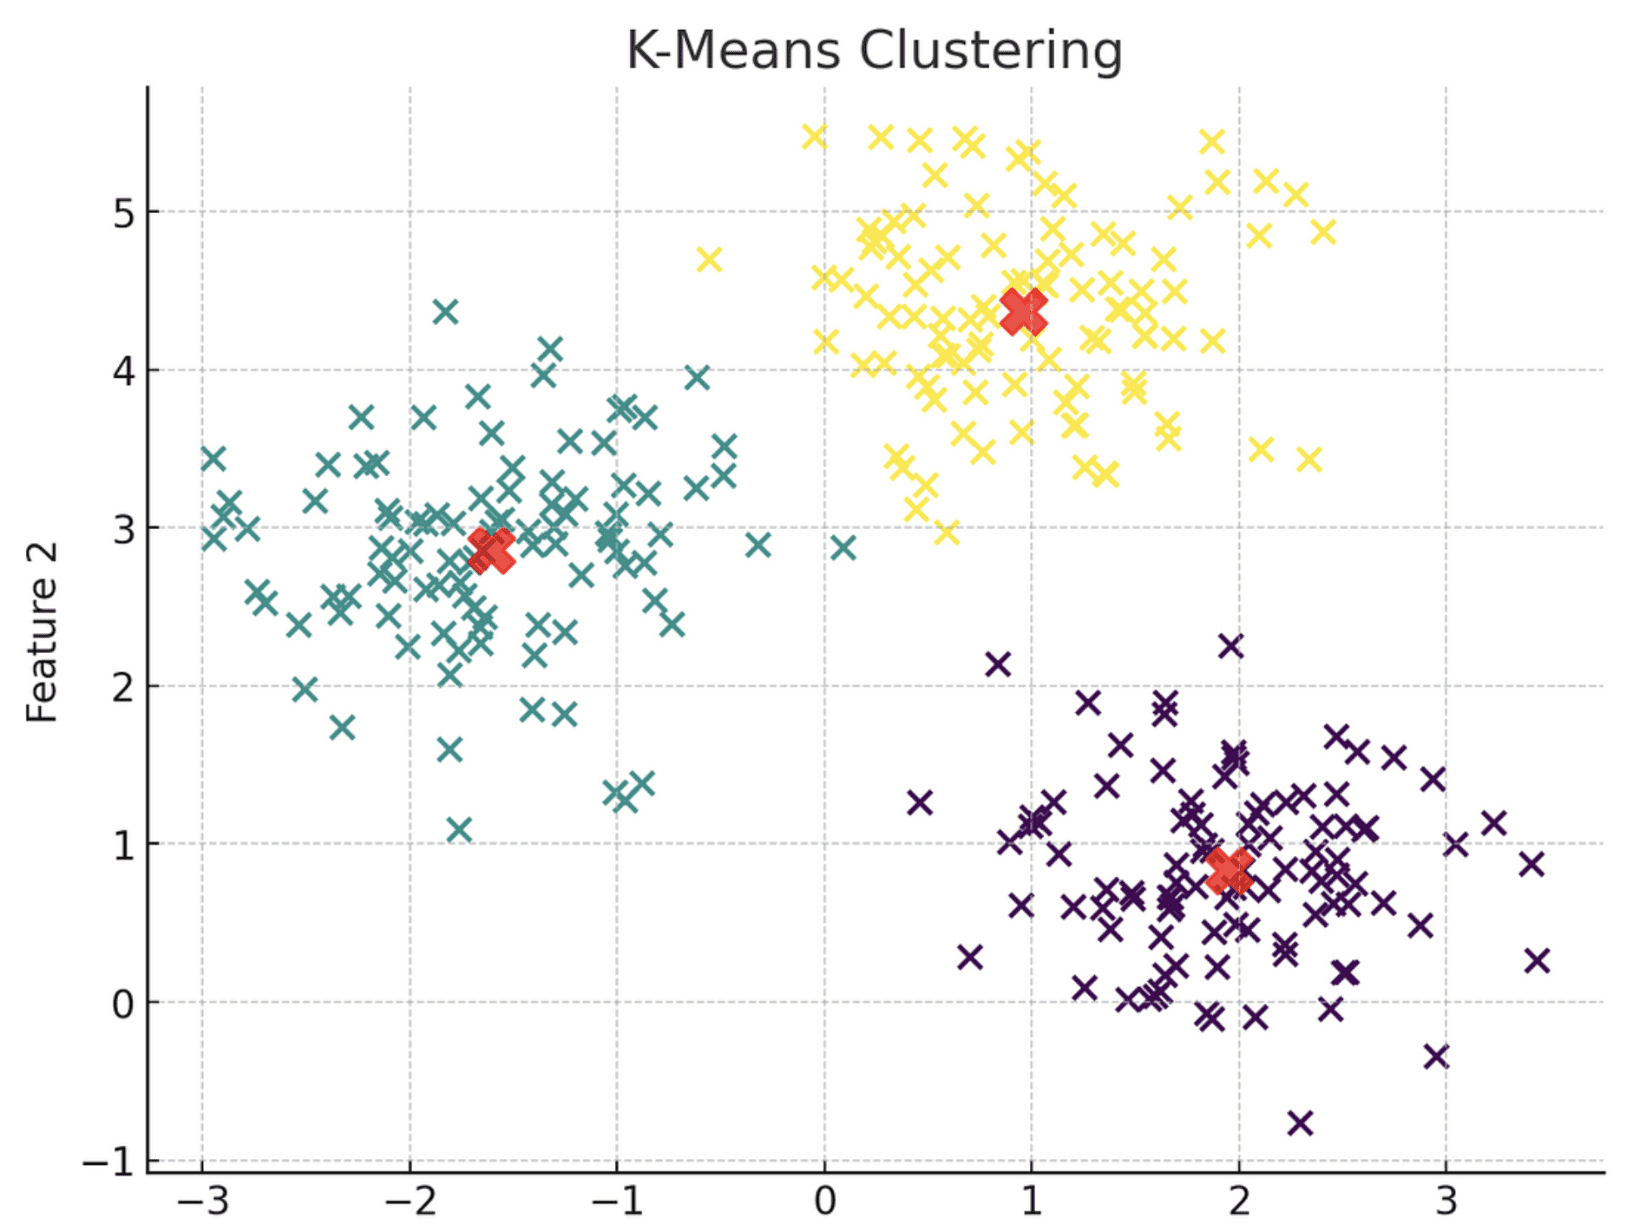 Visual Representation of K-Means Clustering